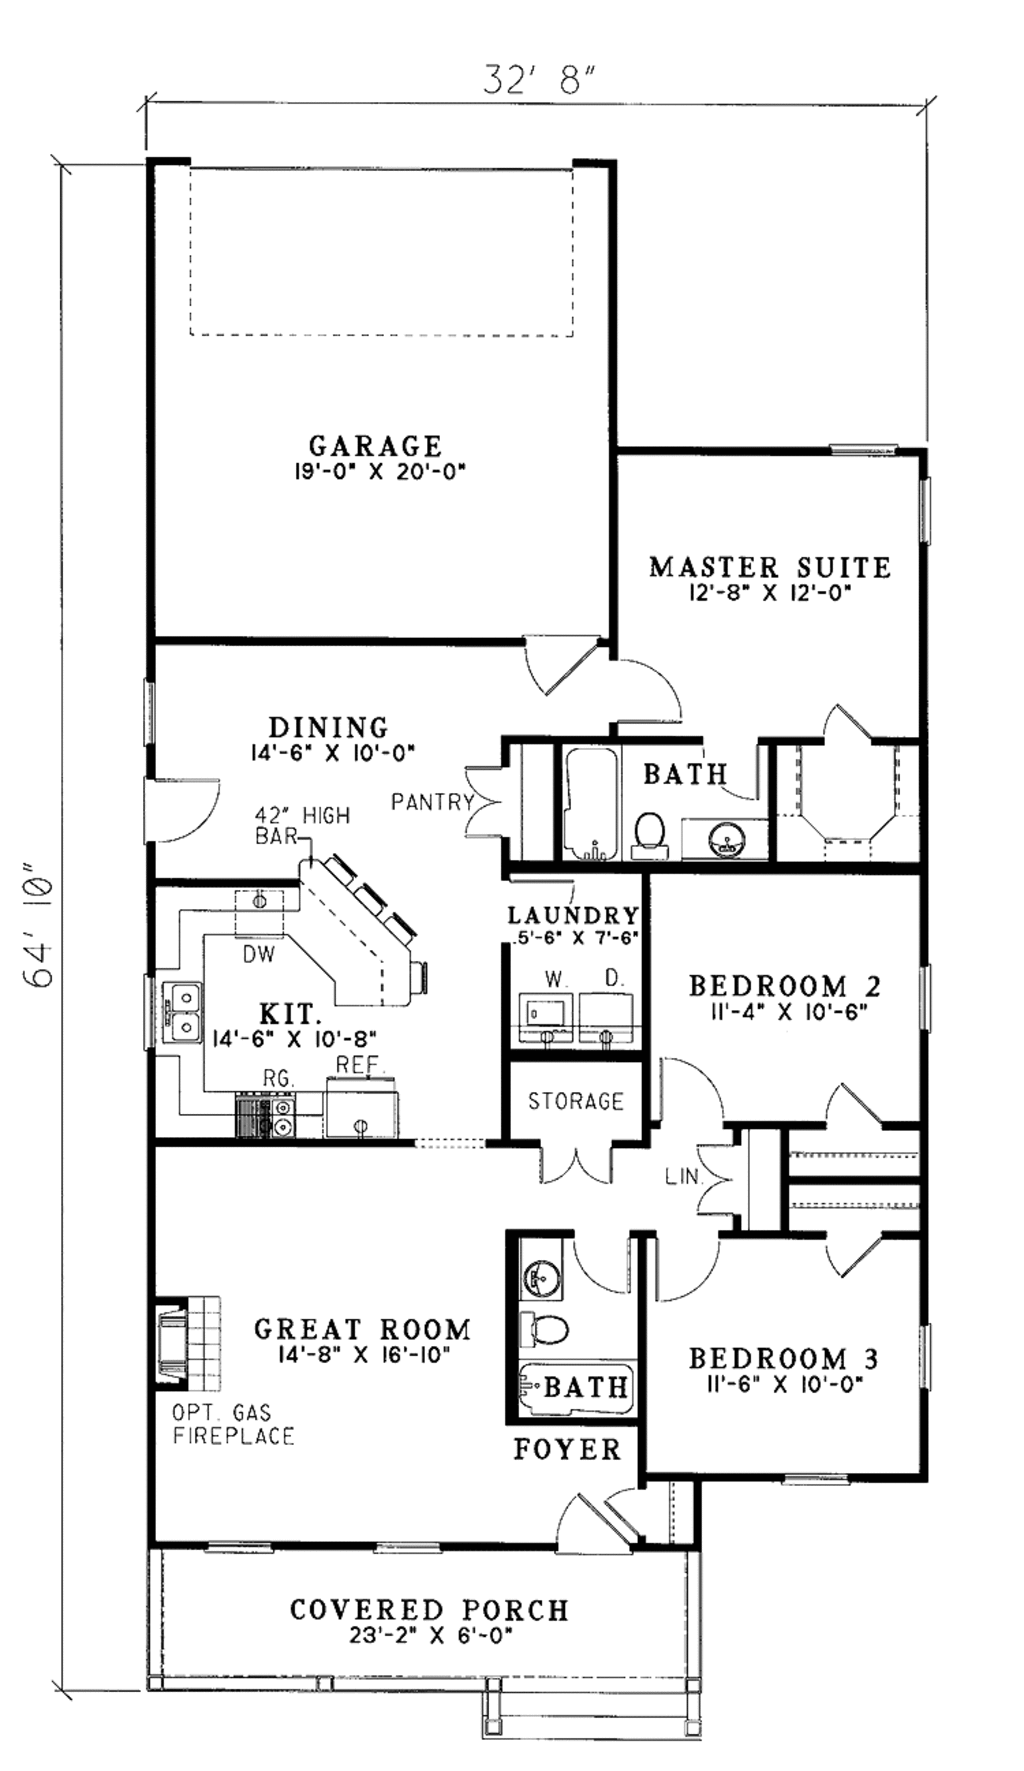 country-style-house-plan-3-beds-2-baths-1342-sq-ft-plan-17-2753